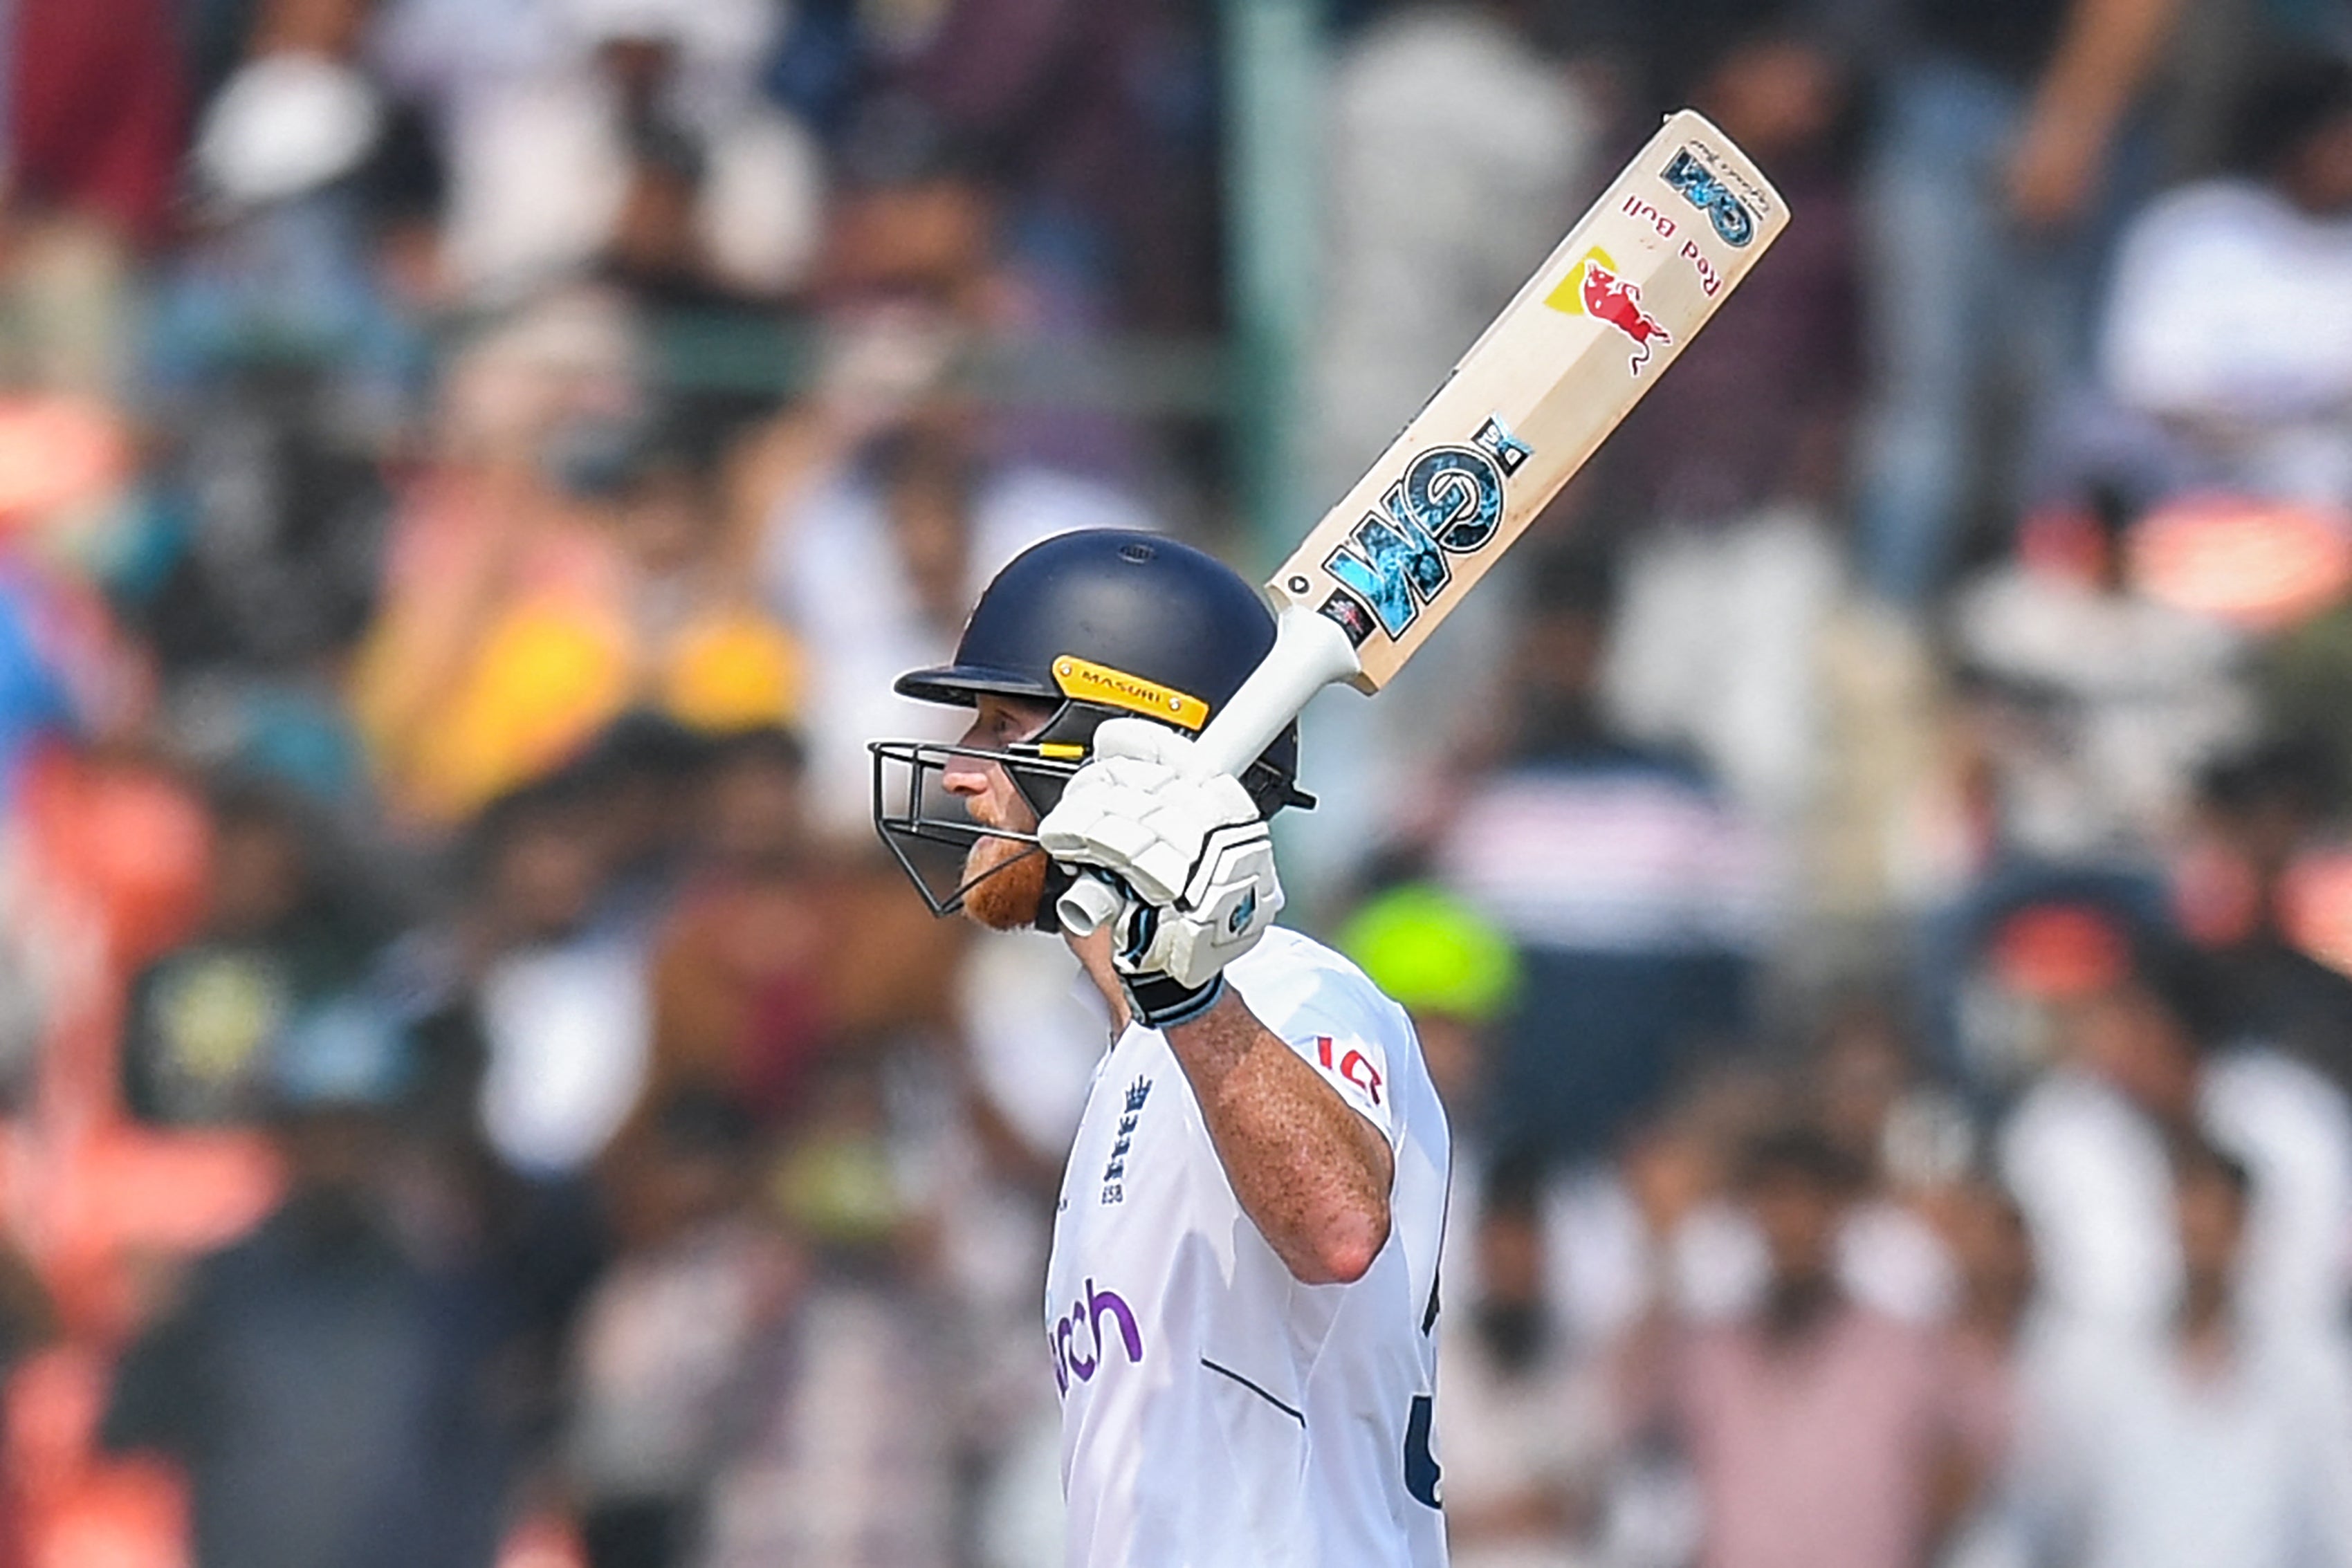 Ben Stokes scored 70 runs as England put on 246 in the first innings against India in Hyderabad